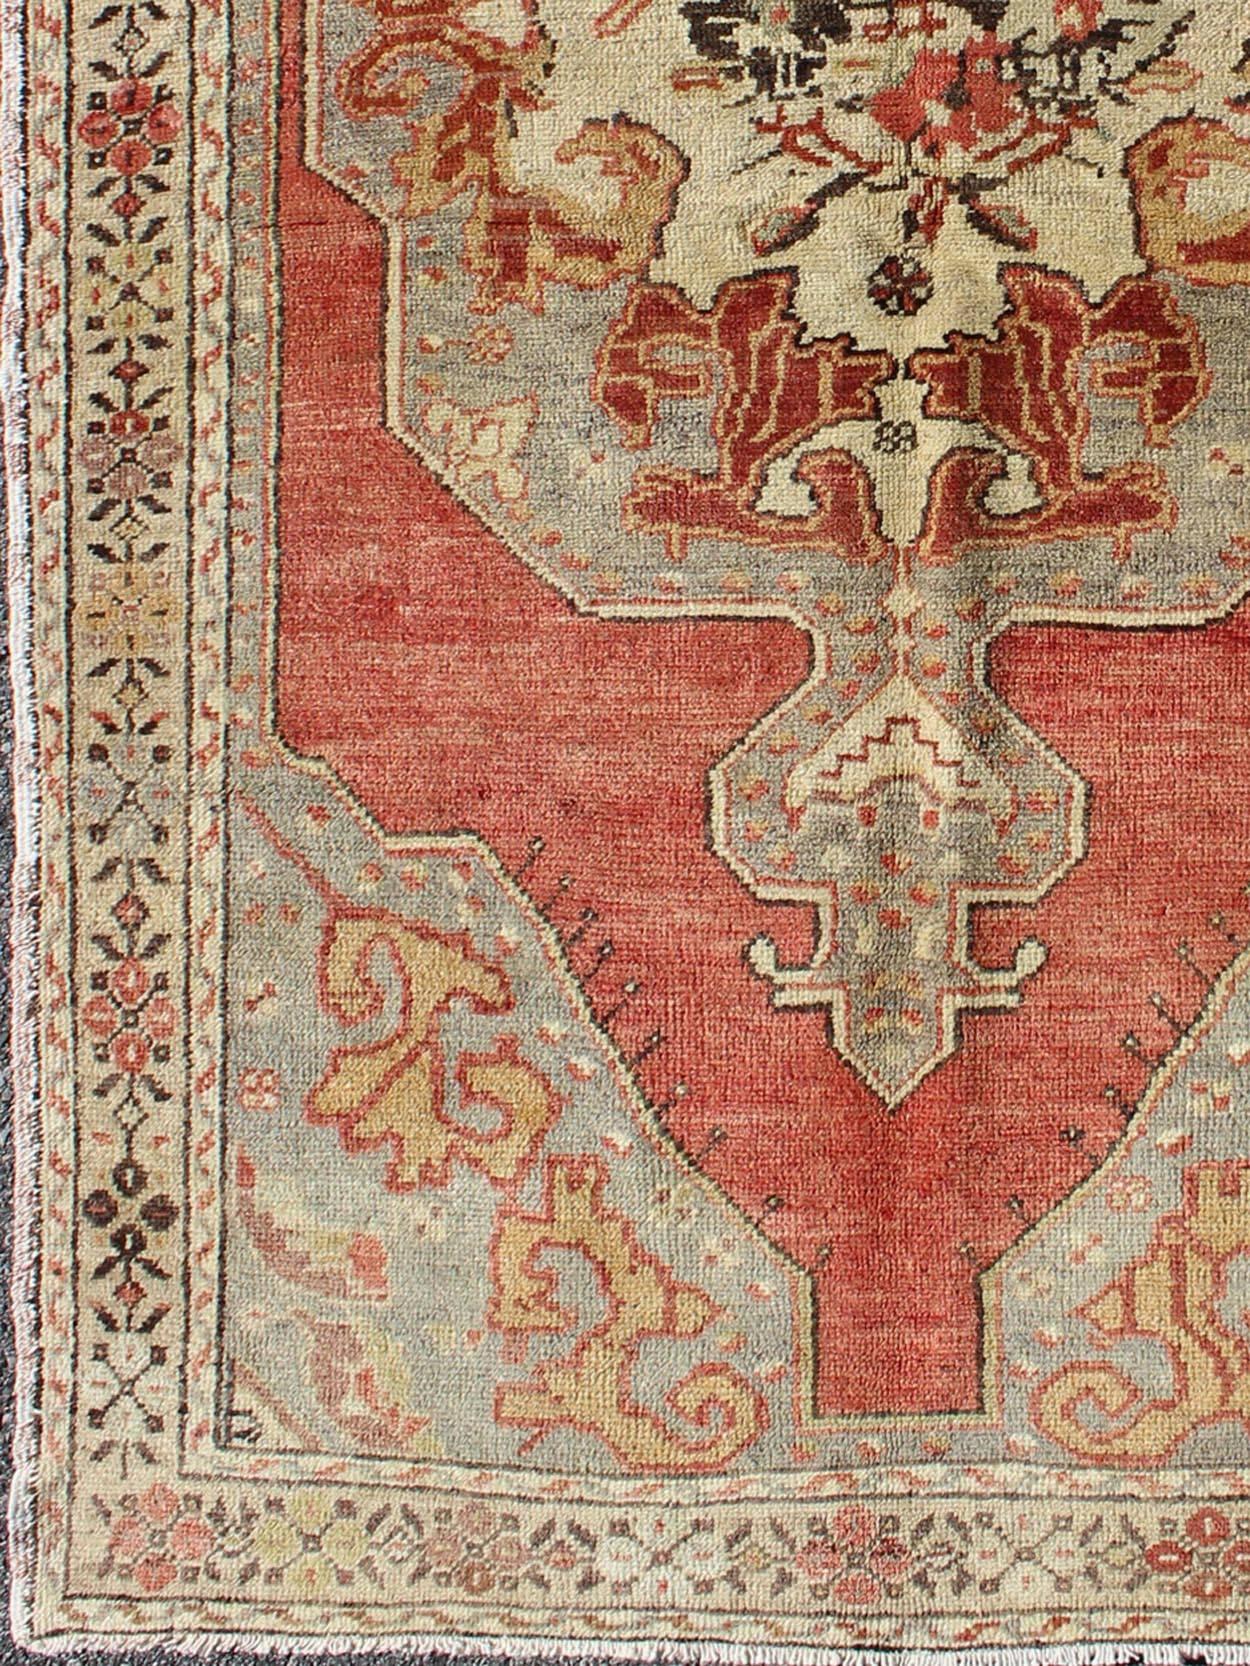 Layered floral medallion design in red and taupe Oushak vintage rug from Turkey, rug tu-ugu-44, country of origin / type: Turkey / Oushak, circa 1930

This vintage Turkish Oushak carpet (circa 1930) features a central, layered, floral medallion